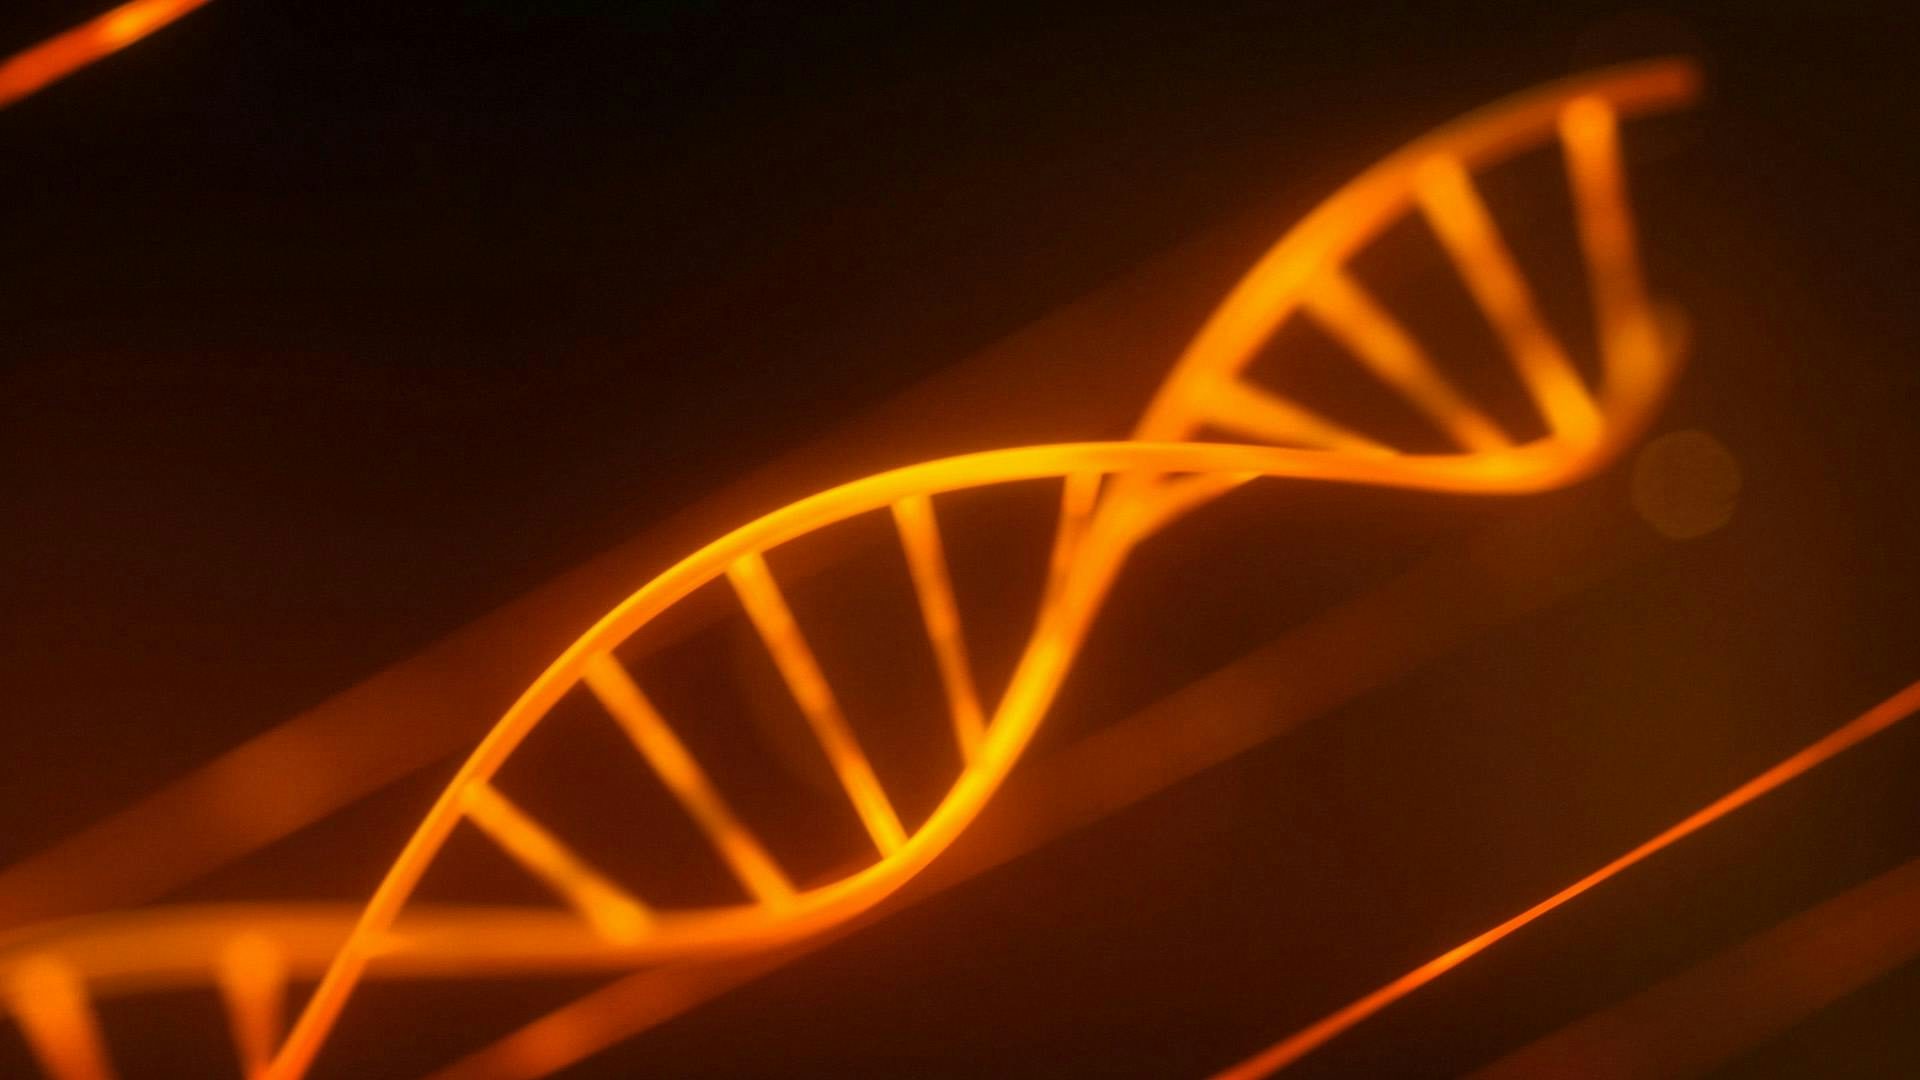 Futuristic shot of DNA in an orange environment